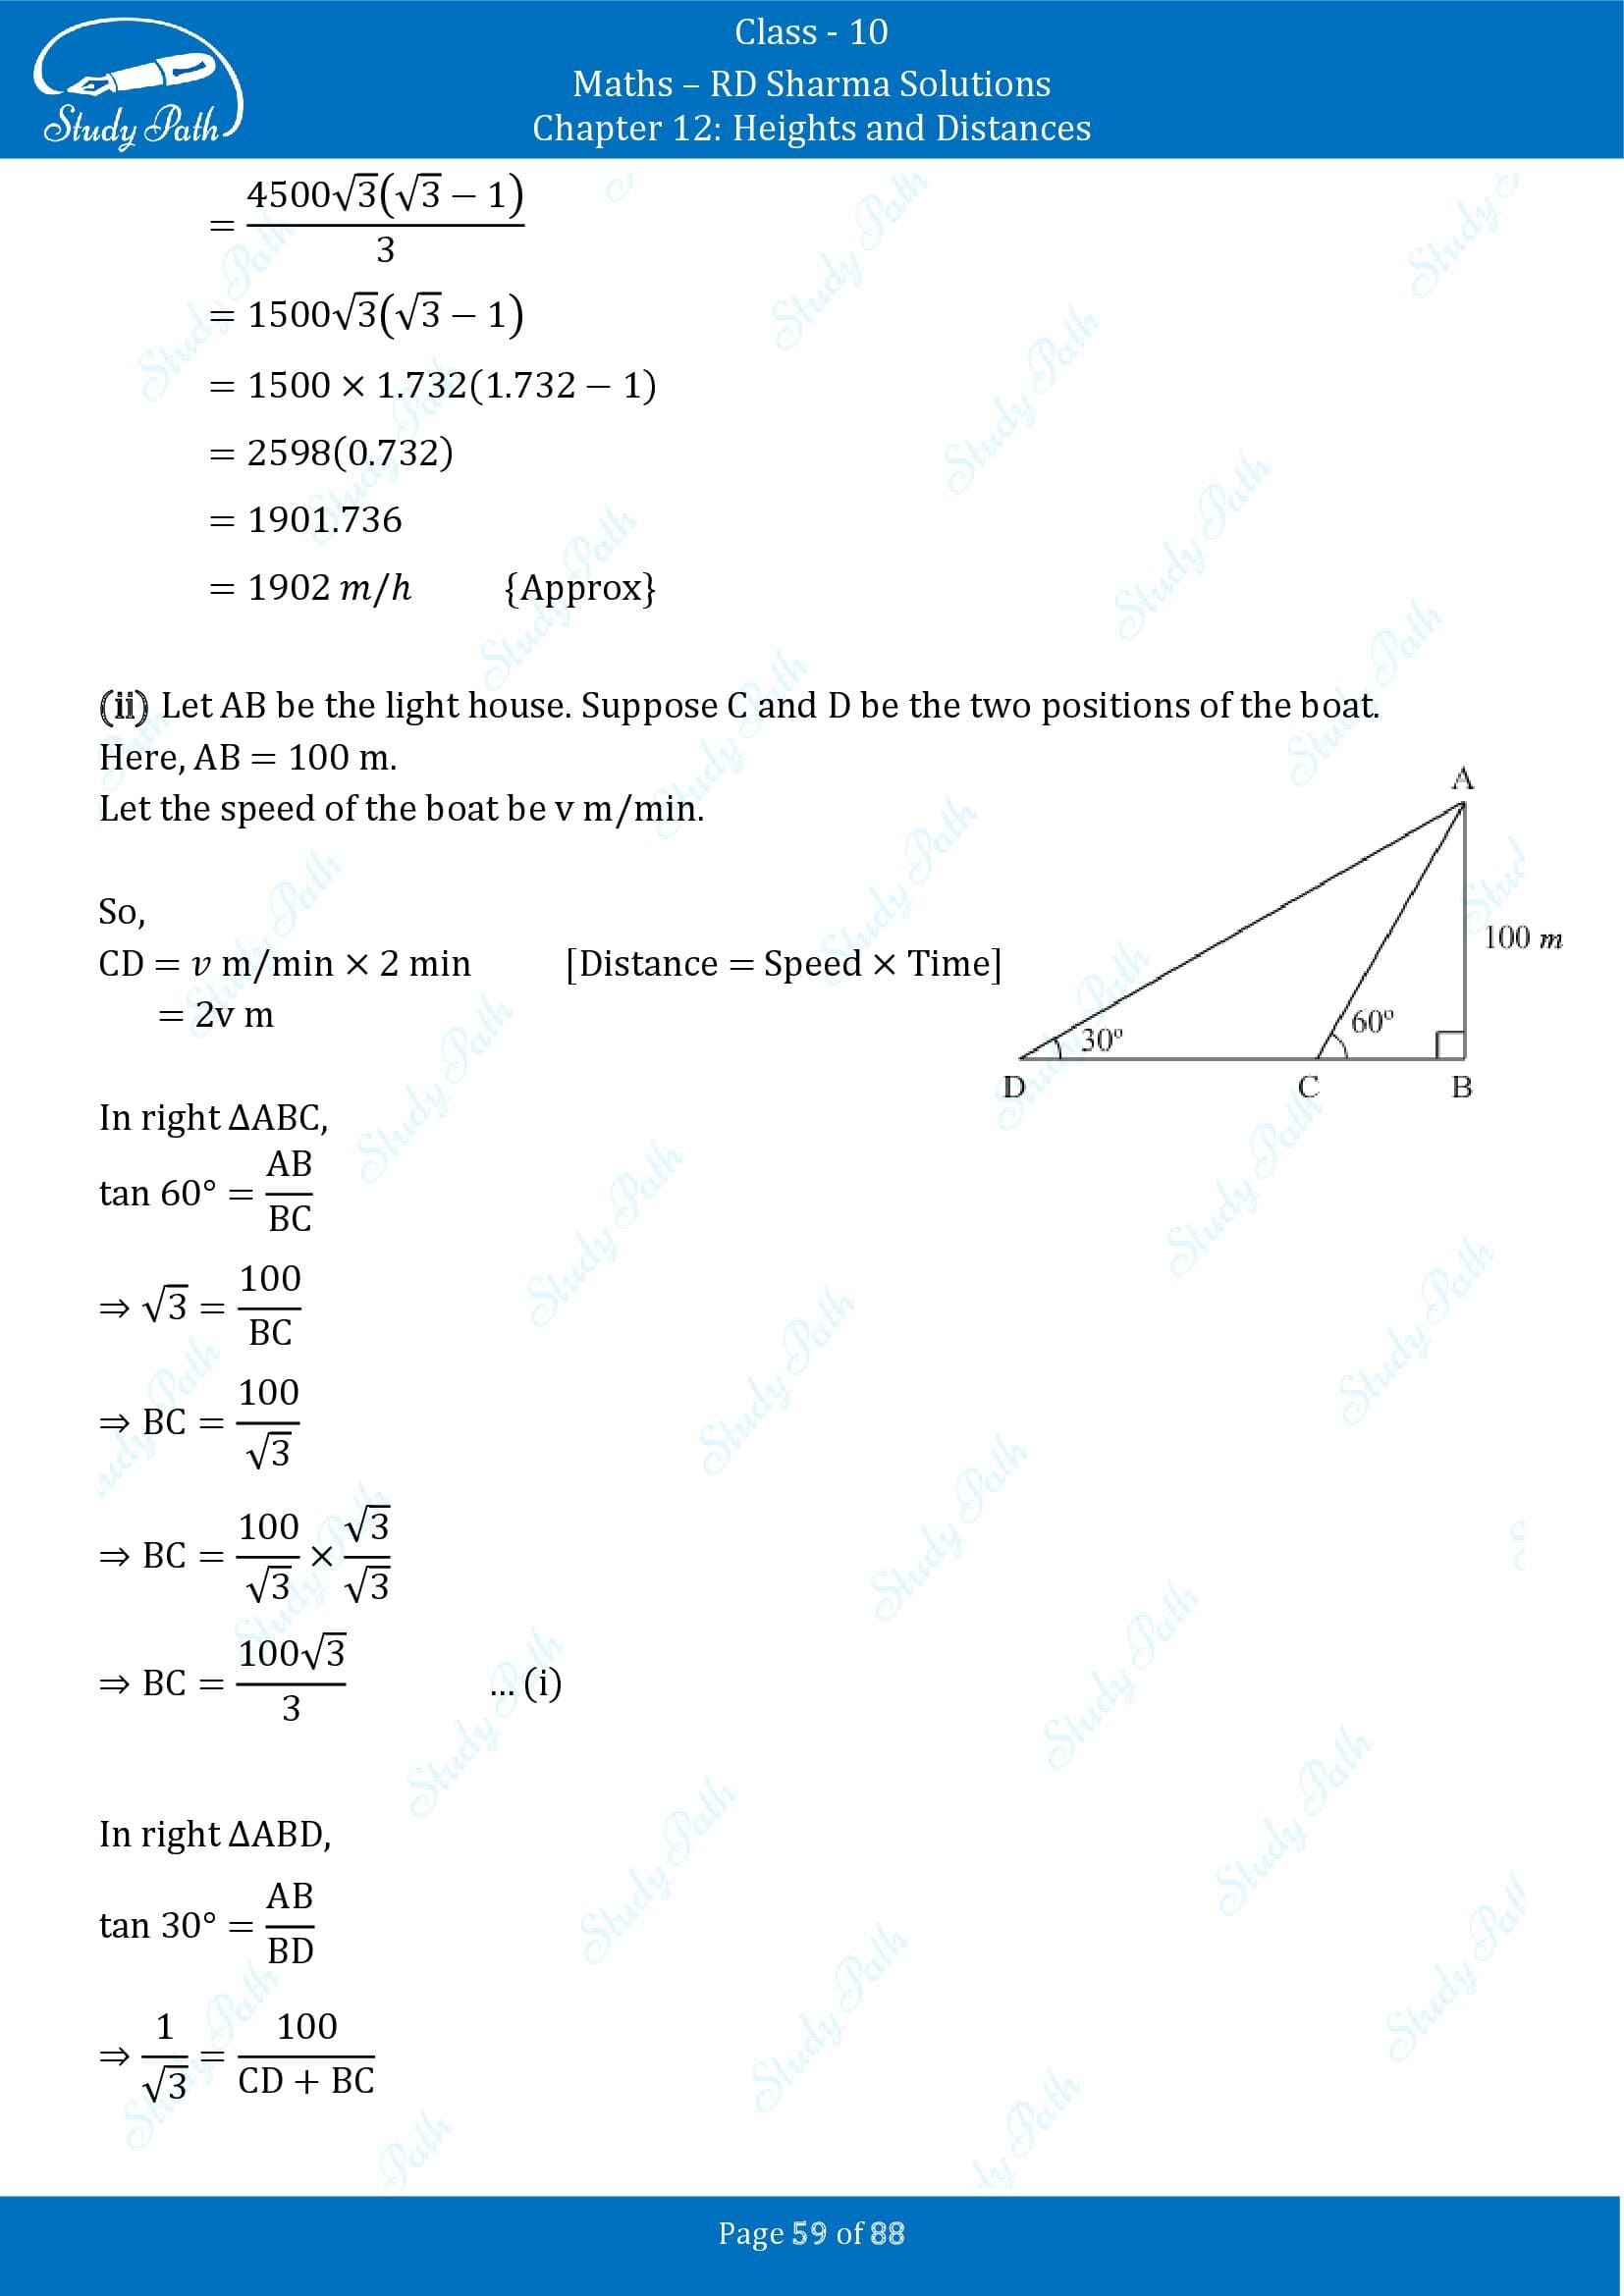 RD Sharma Solutions Class 10 Chapter 12 Heights and Distances Exercise 12.1 00059